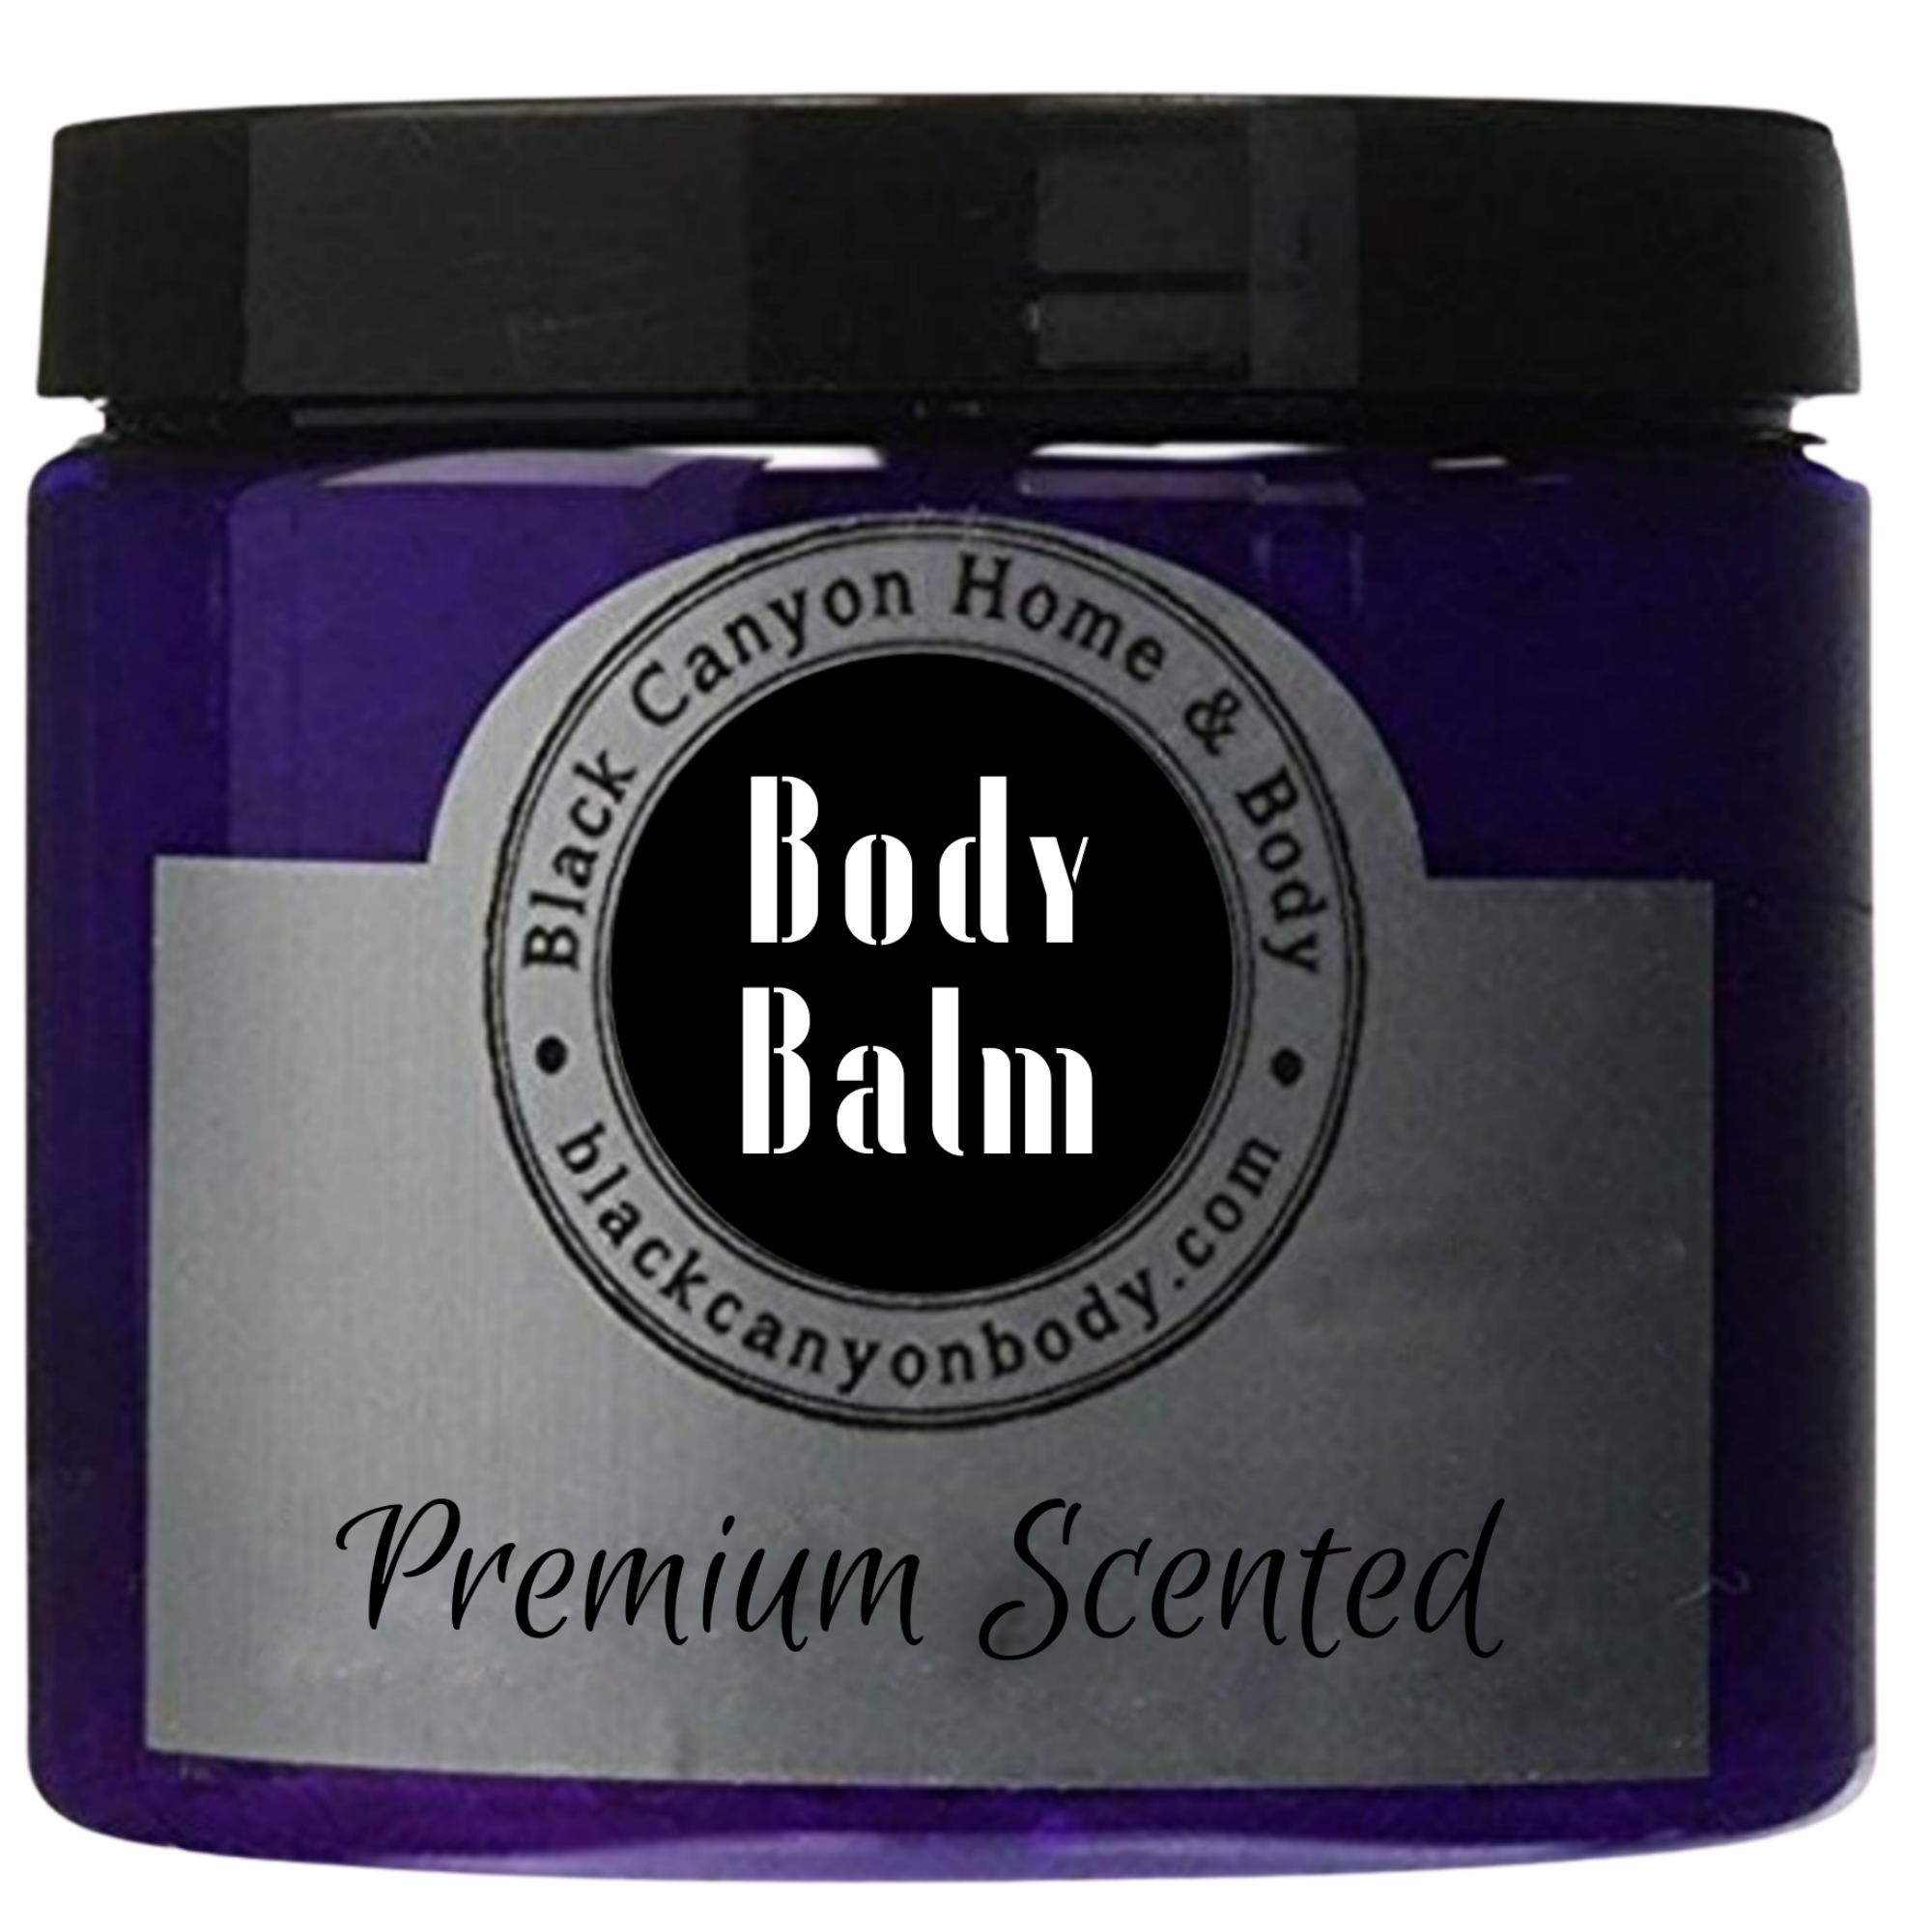 Black Canyon Black Currant & Burnt Sugar Scented Natural Body Balm with Shea